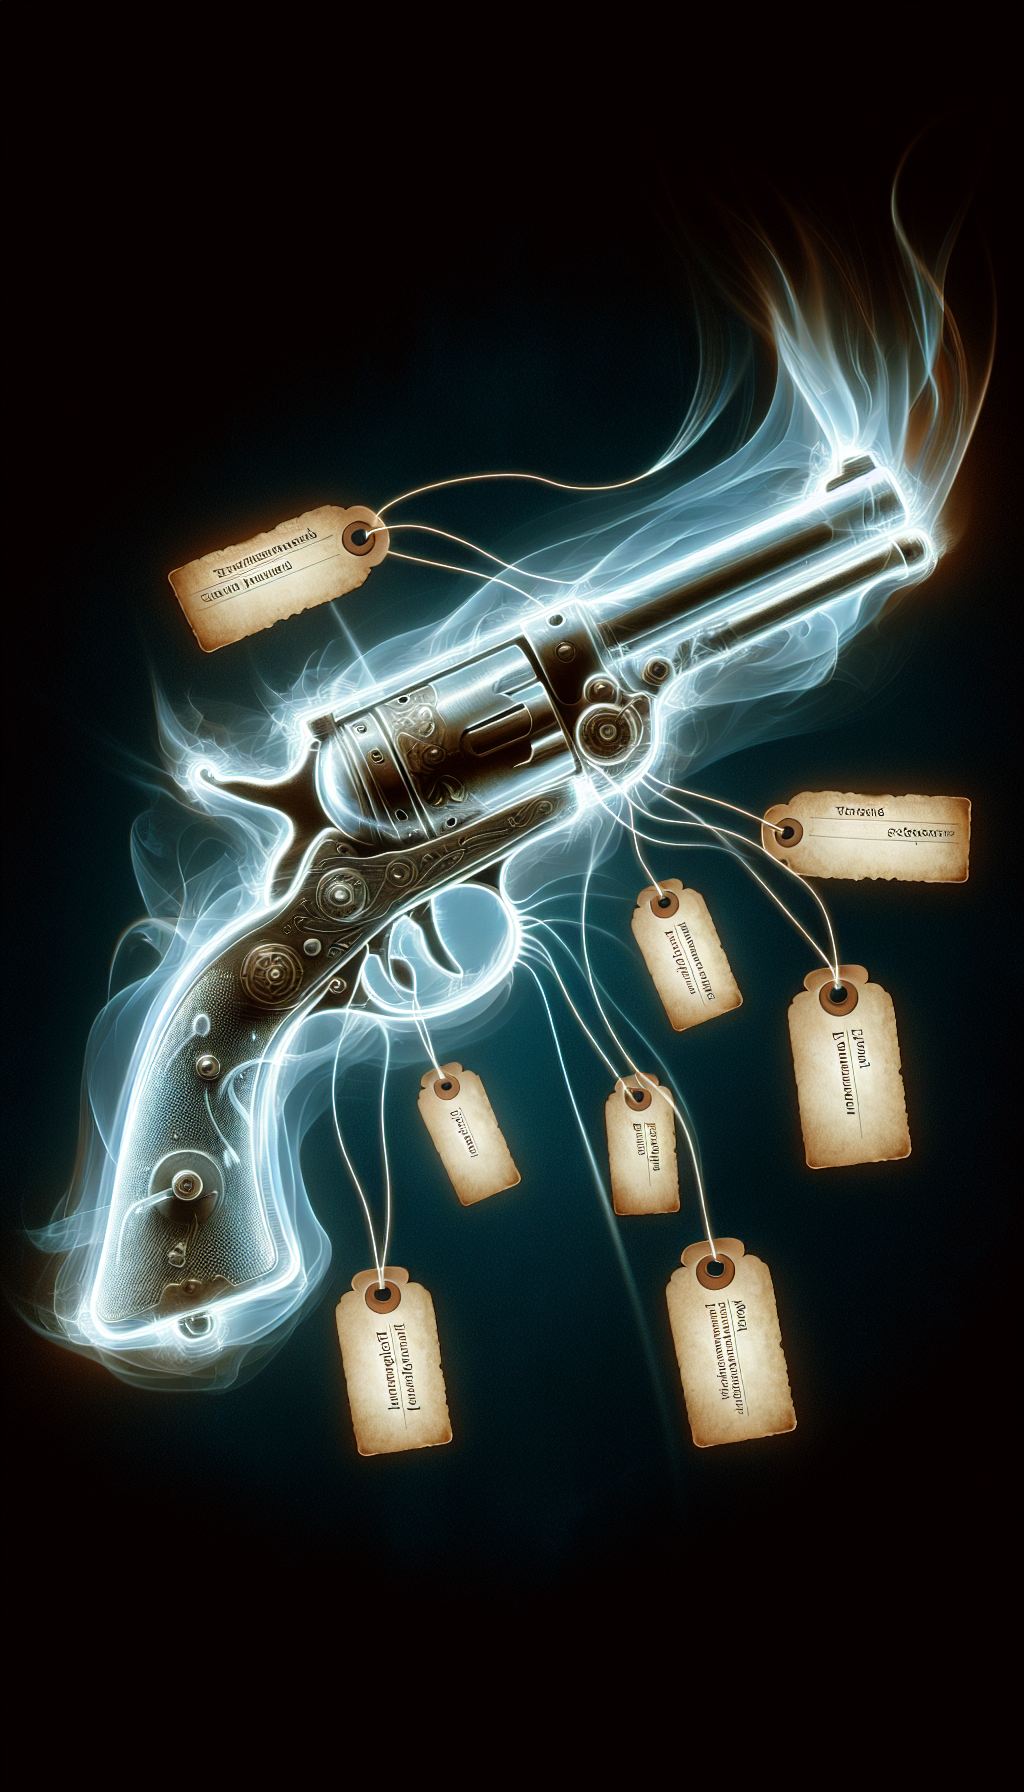 An ornate, ghostly outline of an antique pistol dominates the foreground, its key features—trigger mechanism, barrel filigree, and flintlock detail—pulsating with faint glows and labels appearing like aged parchment tags. Each identifying mark glimmers on the weapon's silhouette, showcasing the identification process within its ethereal blueprint, seamlessly blending modern diagnostics with the artifact's timeless craftsmanship.